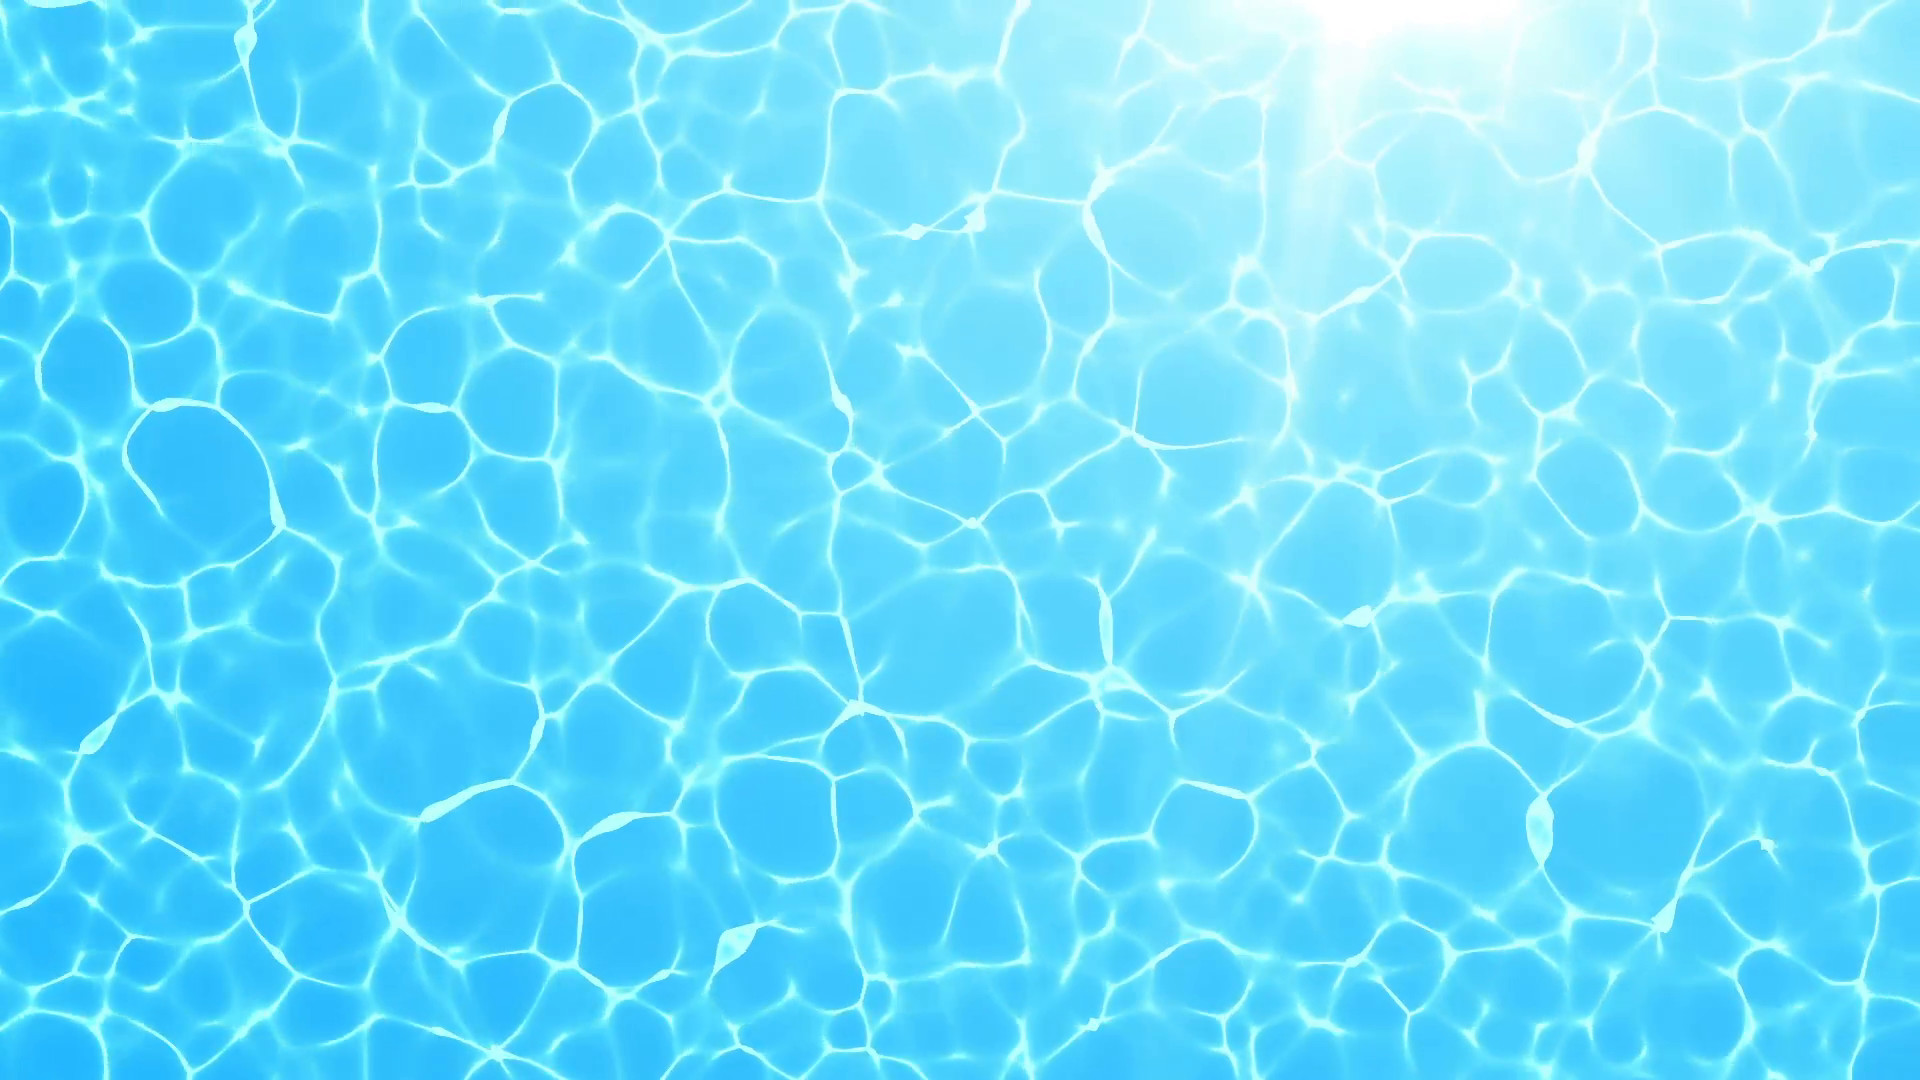 Summer Clear Swimming Pool Background Wallpaper Image For Free Download   Pngtree